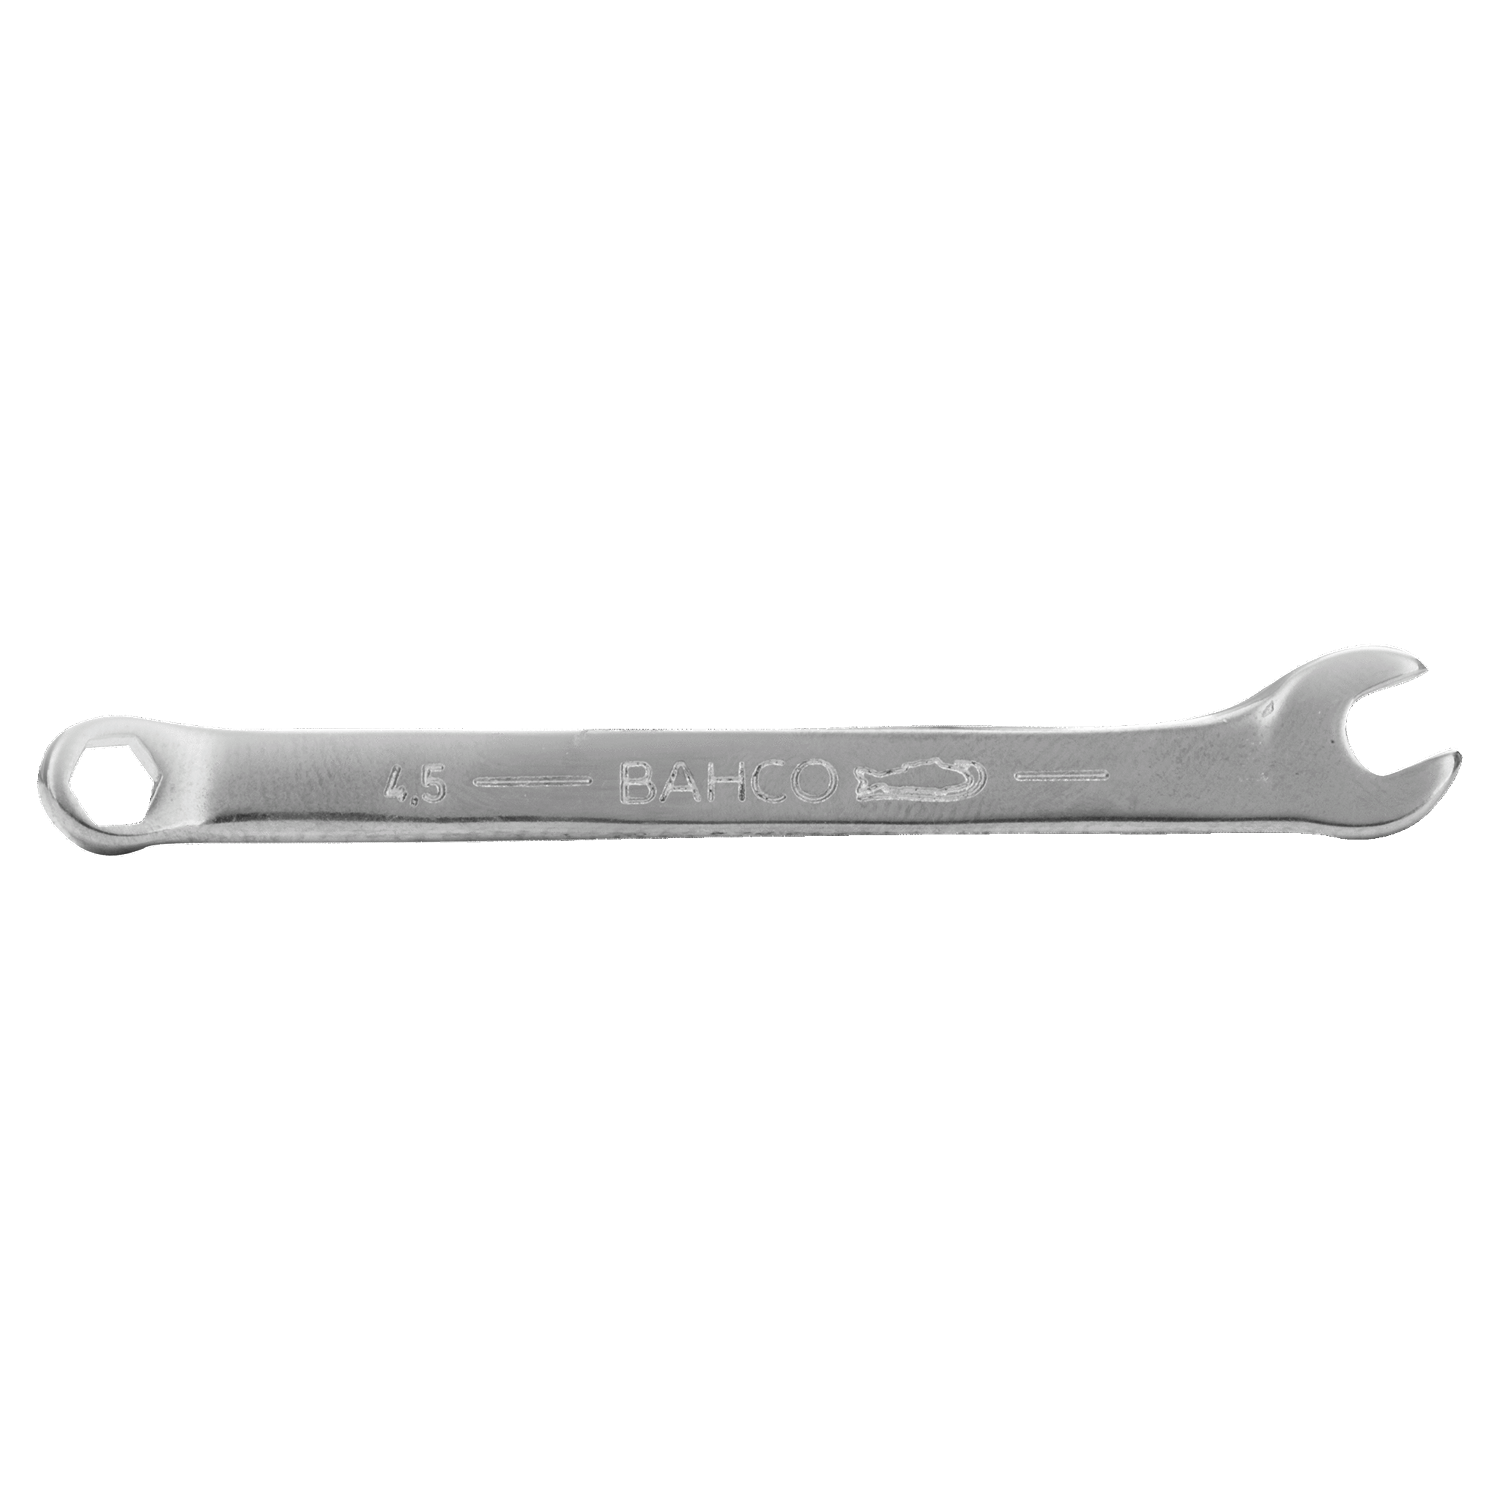 BAHCO 4020L-M Metric Lilliput Combination Wrench Chrome Finish - Premium Combination Wrench from BAHCO - Shop now at Yew Aik.